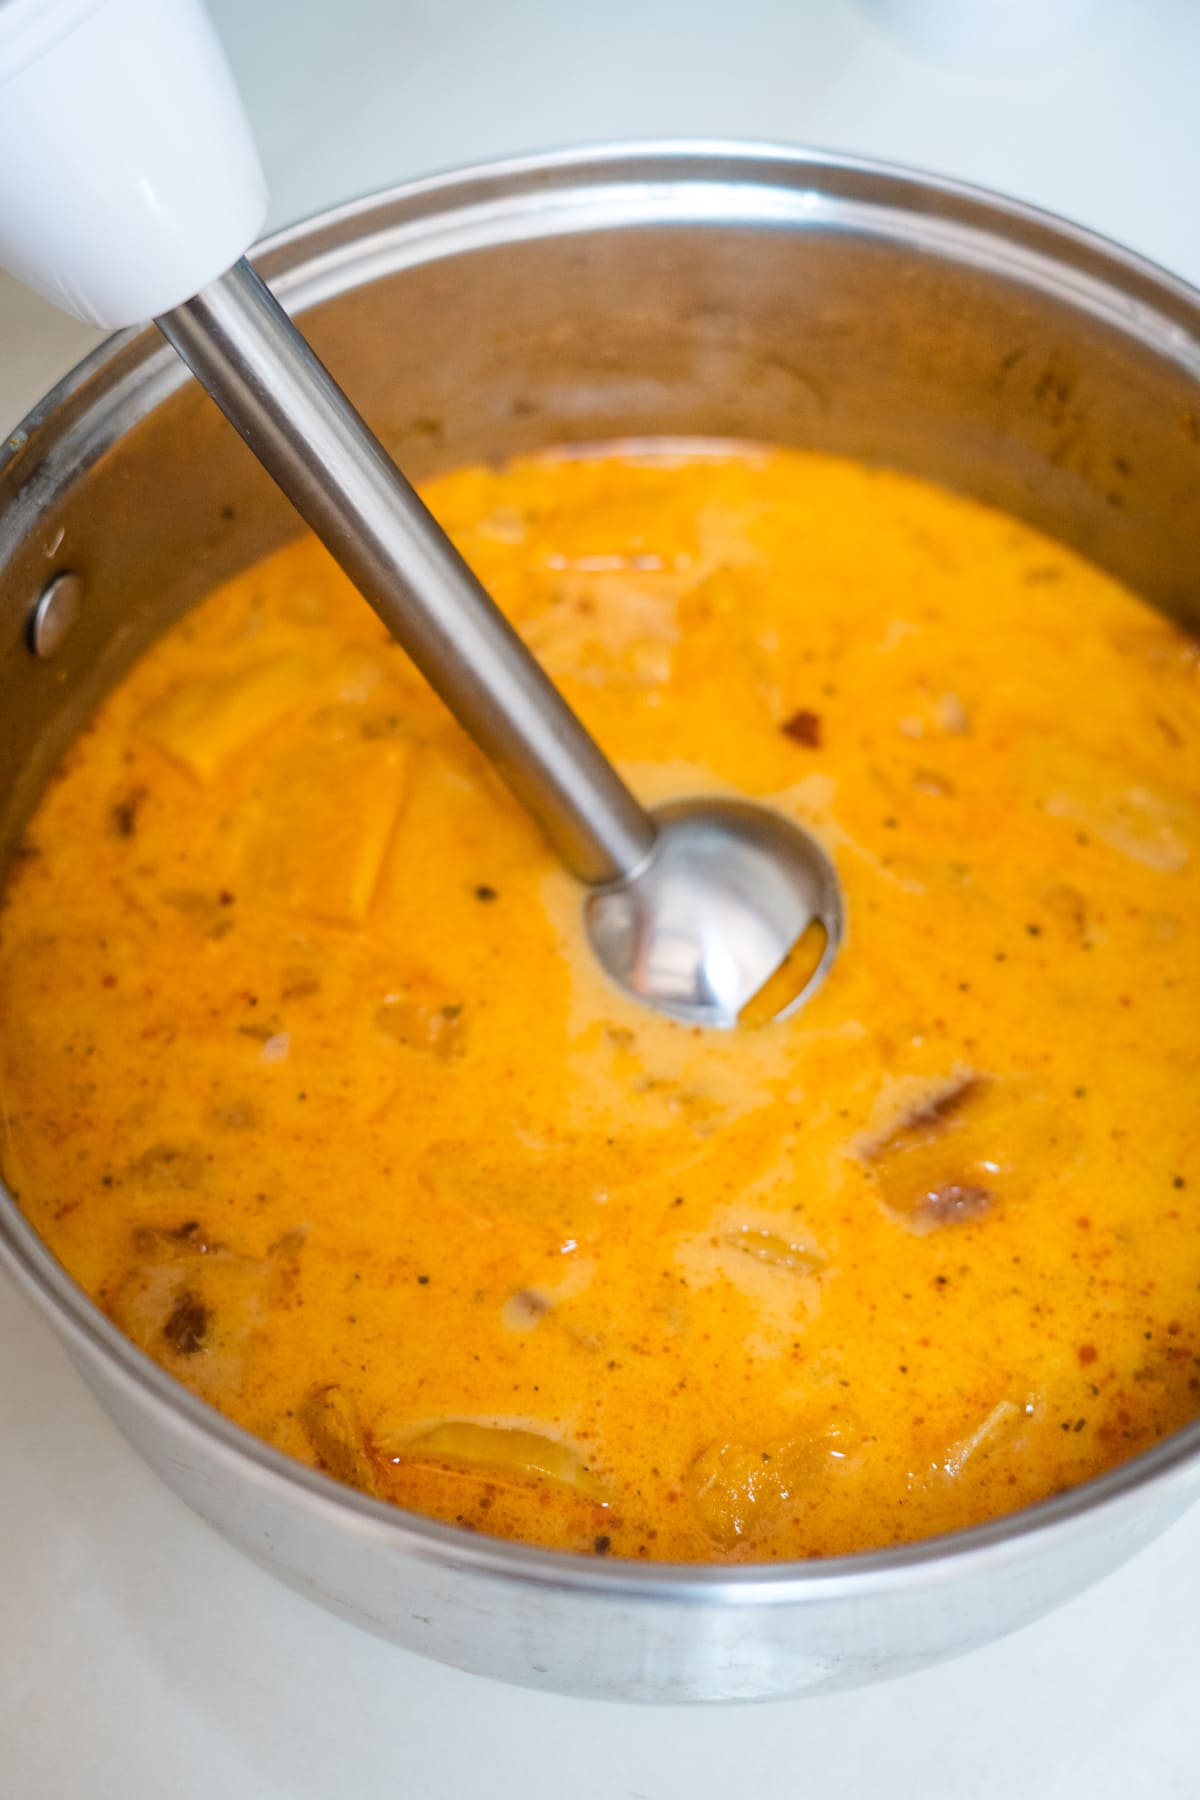 A pot of butternut squash soup being stirred with a metal spoon.